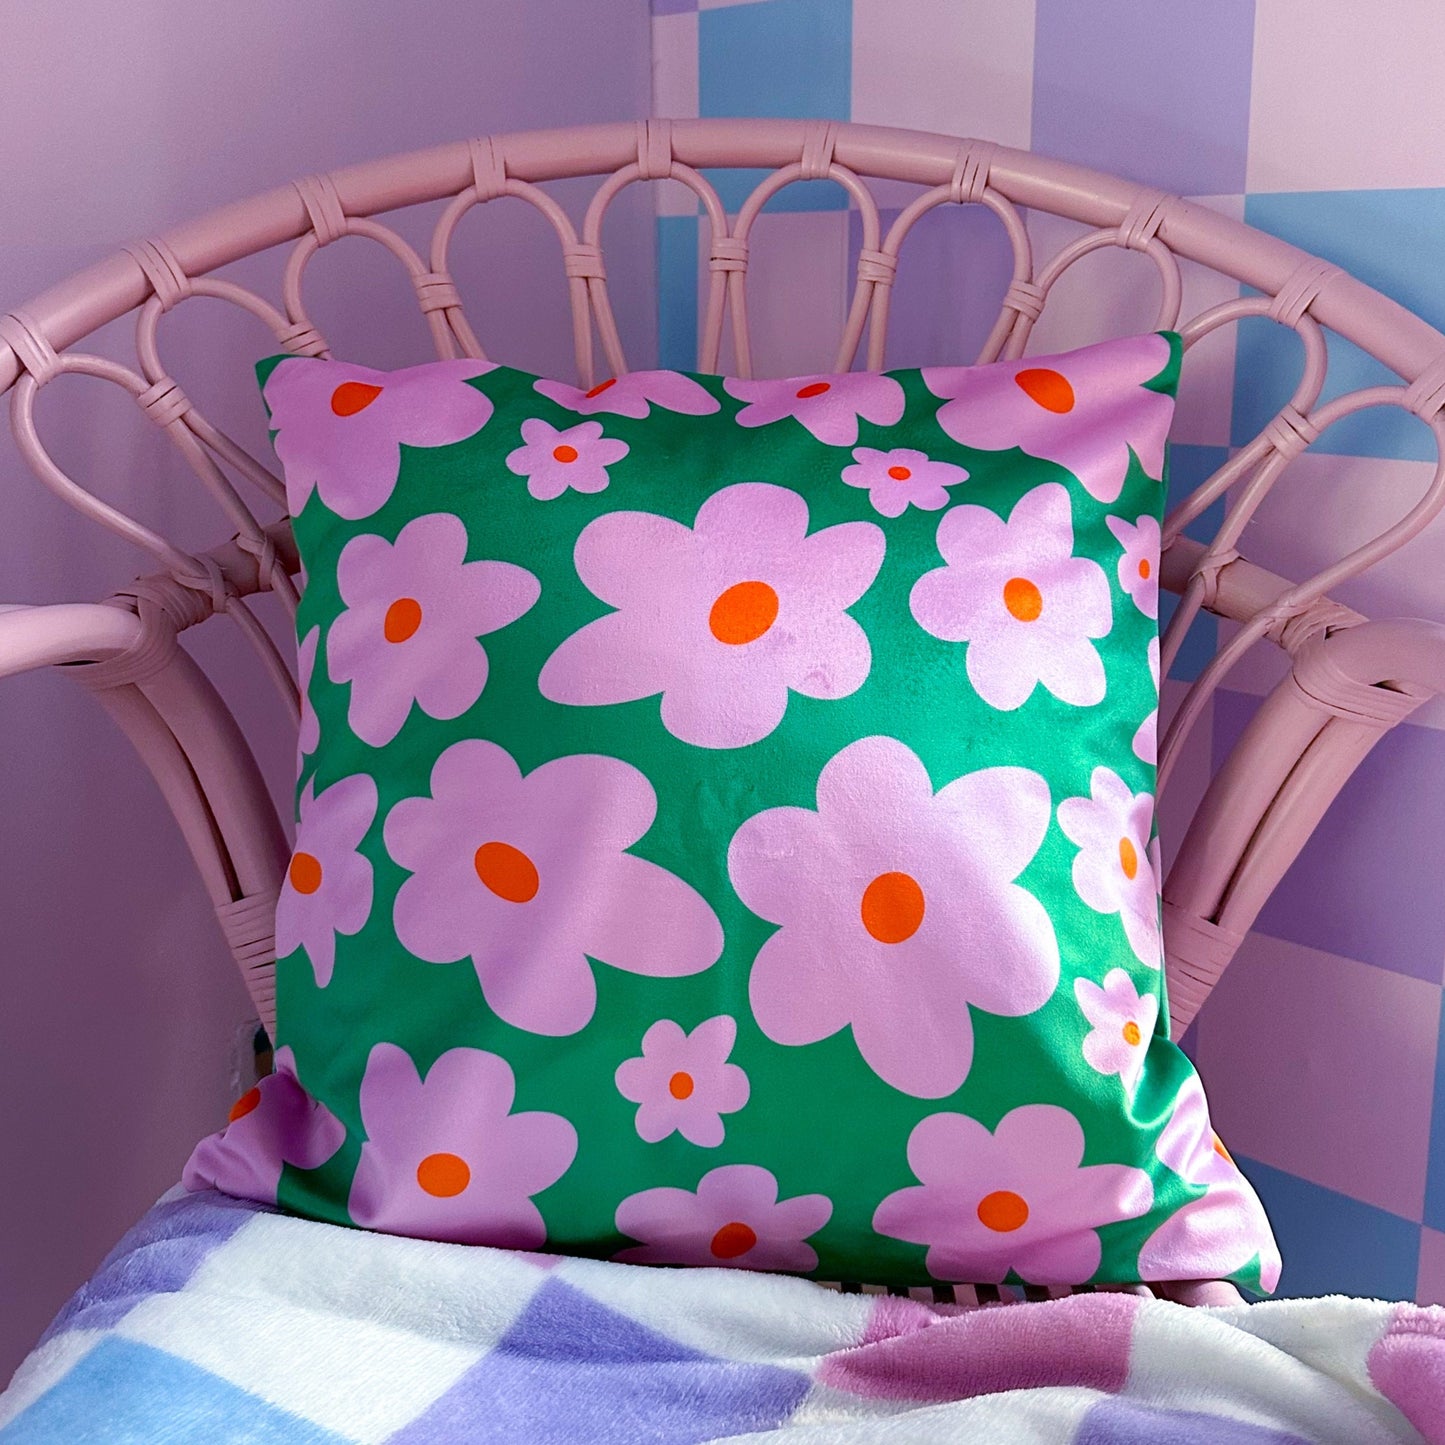 velvet cushion with daisy design in green and pink colours for bedroom, living room